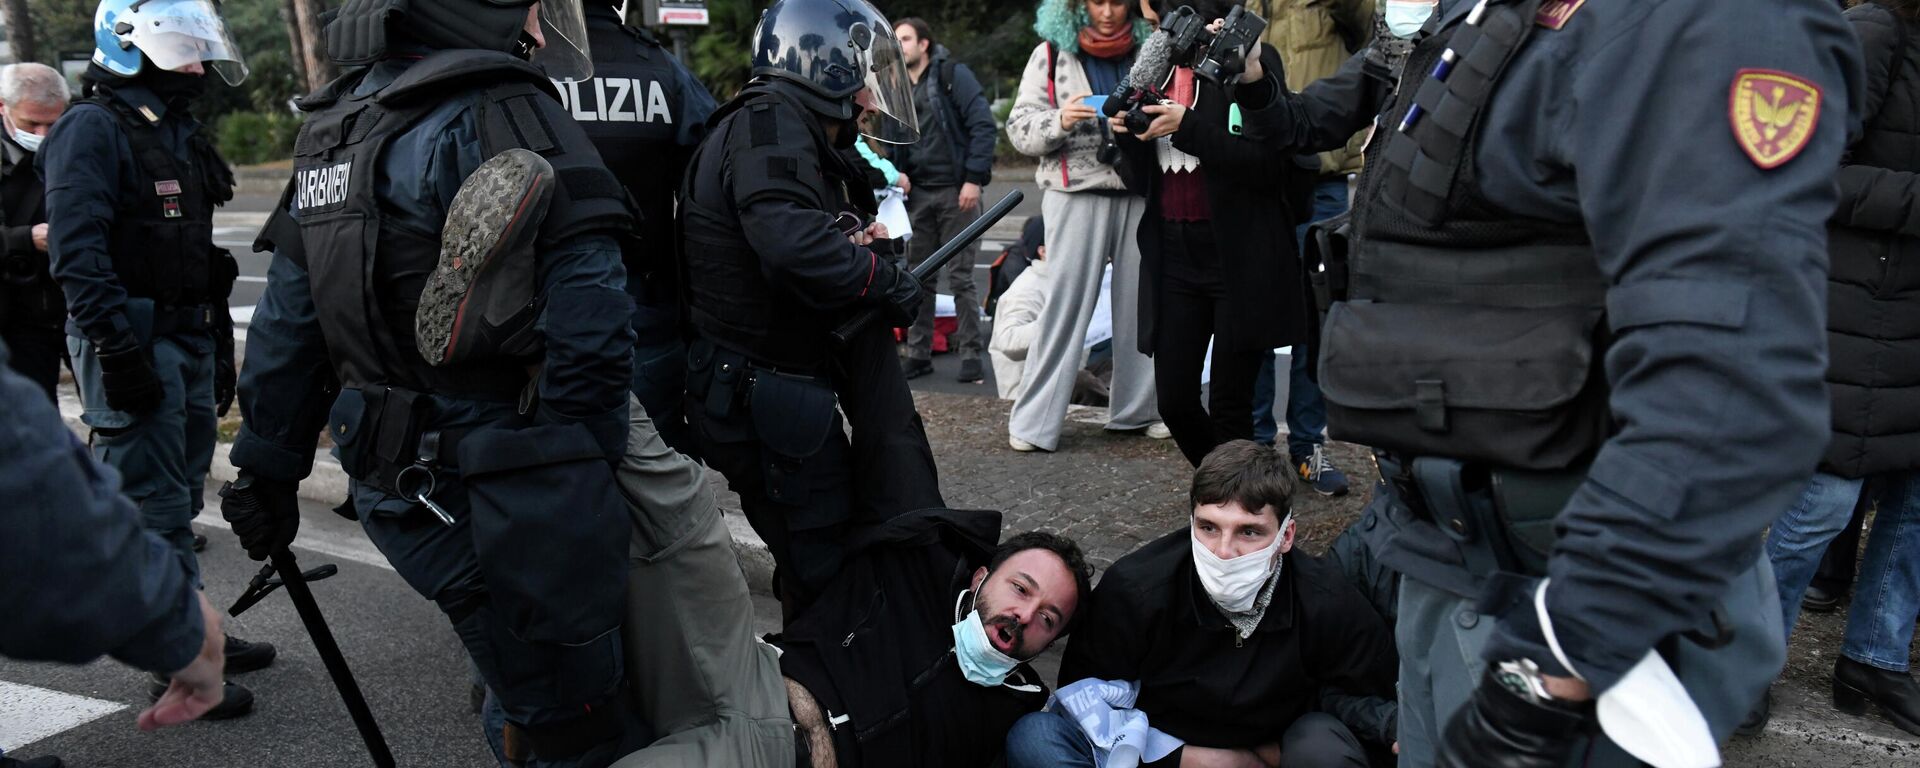 Carabinieri police carry away an Extinction Rebellion activist as the demonstrators block a road near the Ministry of Ecological Transition during the G20 leaders summit in Rome - Sputnik International, 1920, 30.10.2021